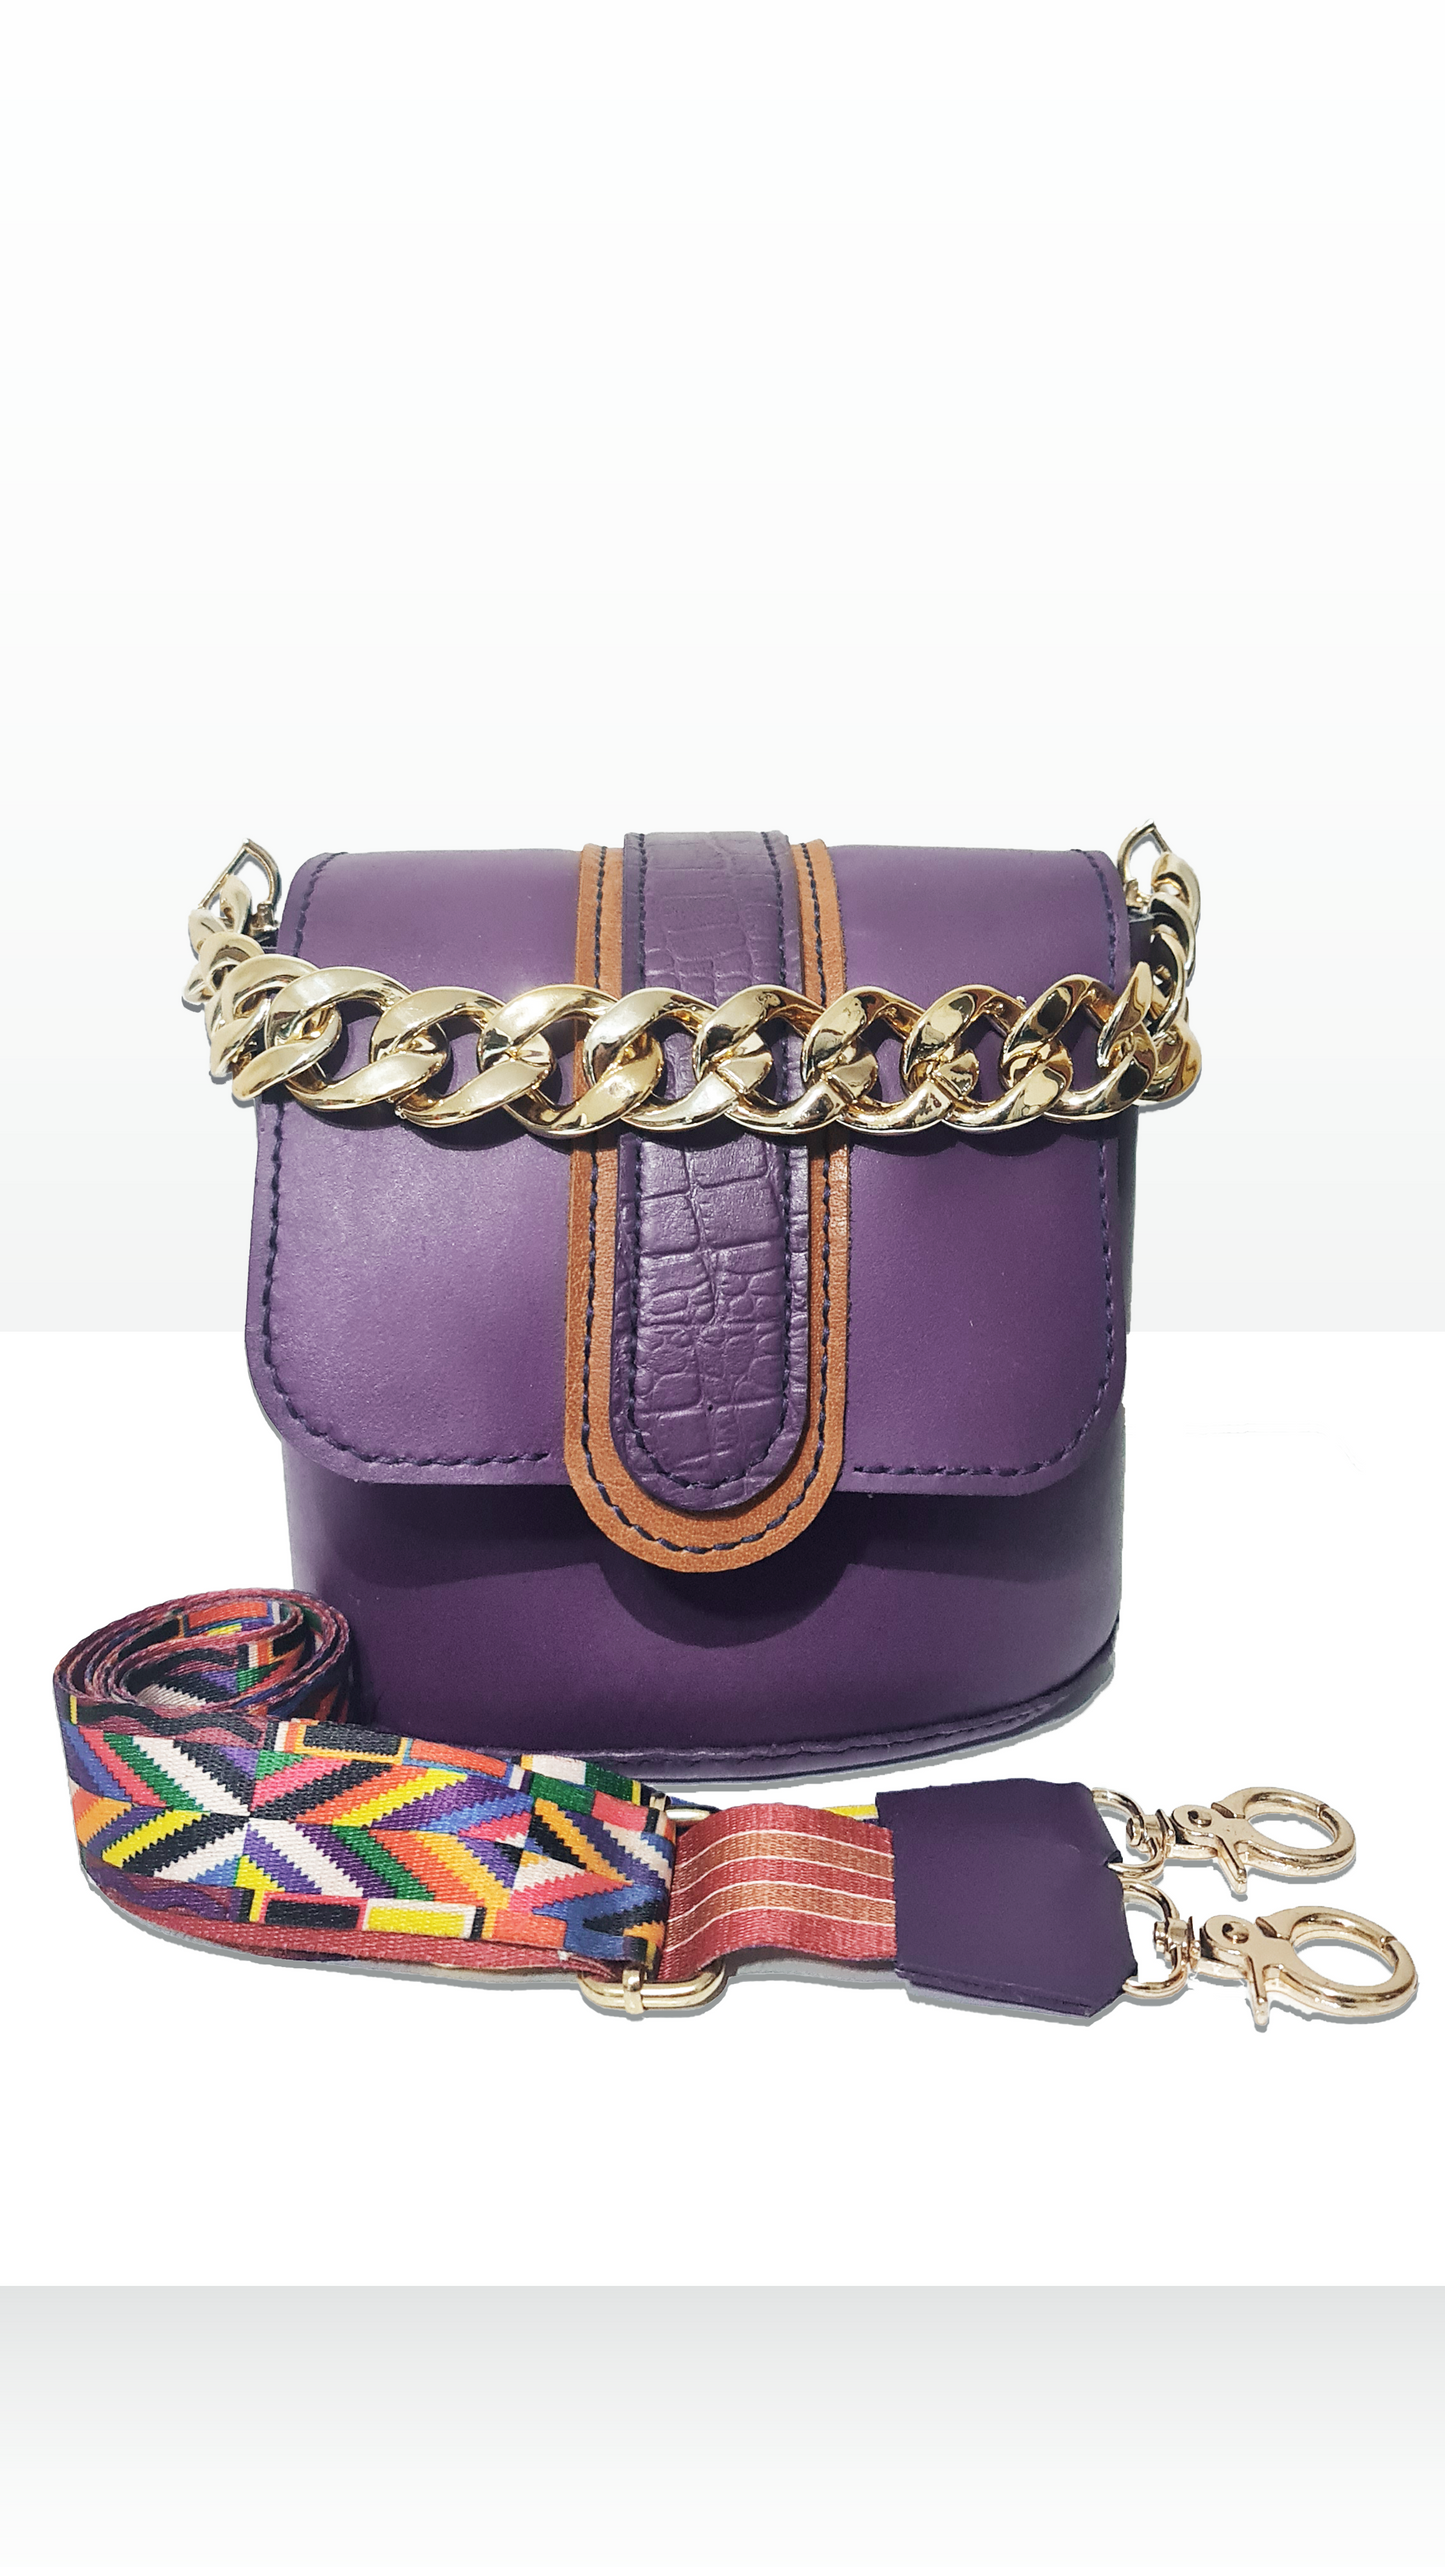 Trendy purple bag with a gold chain handle & long strap